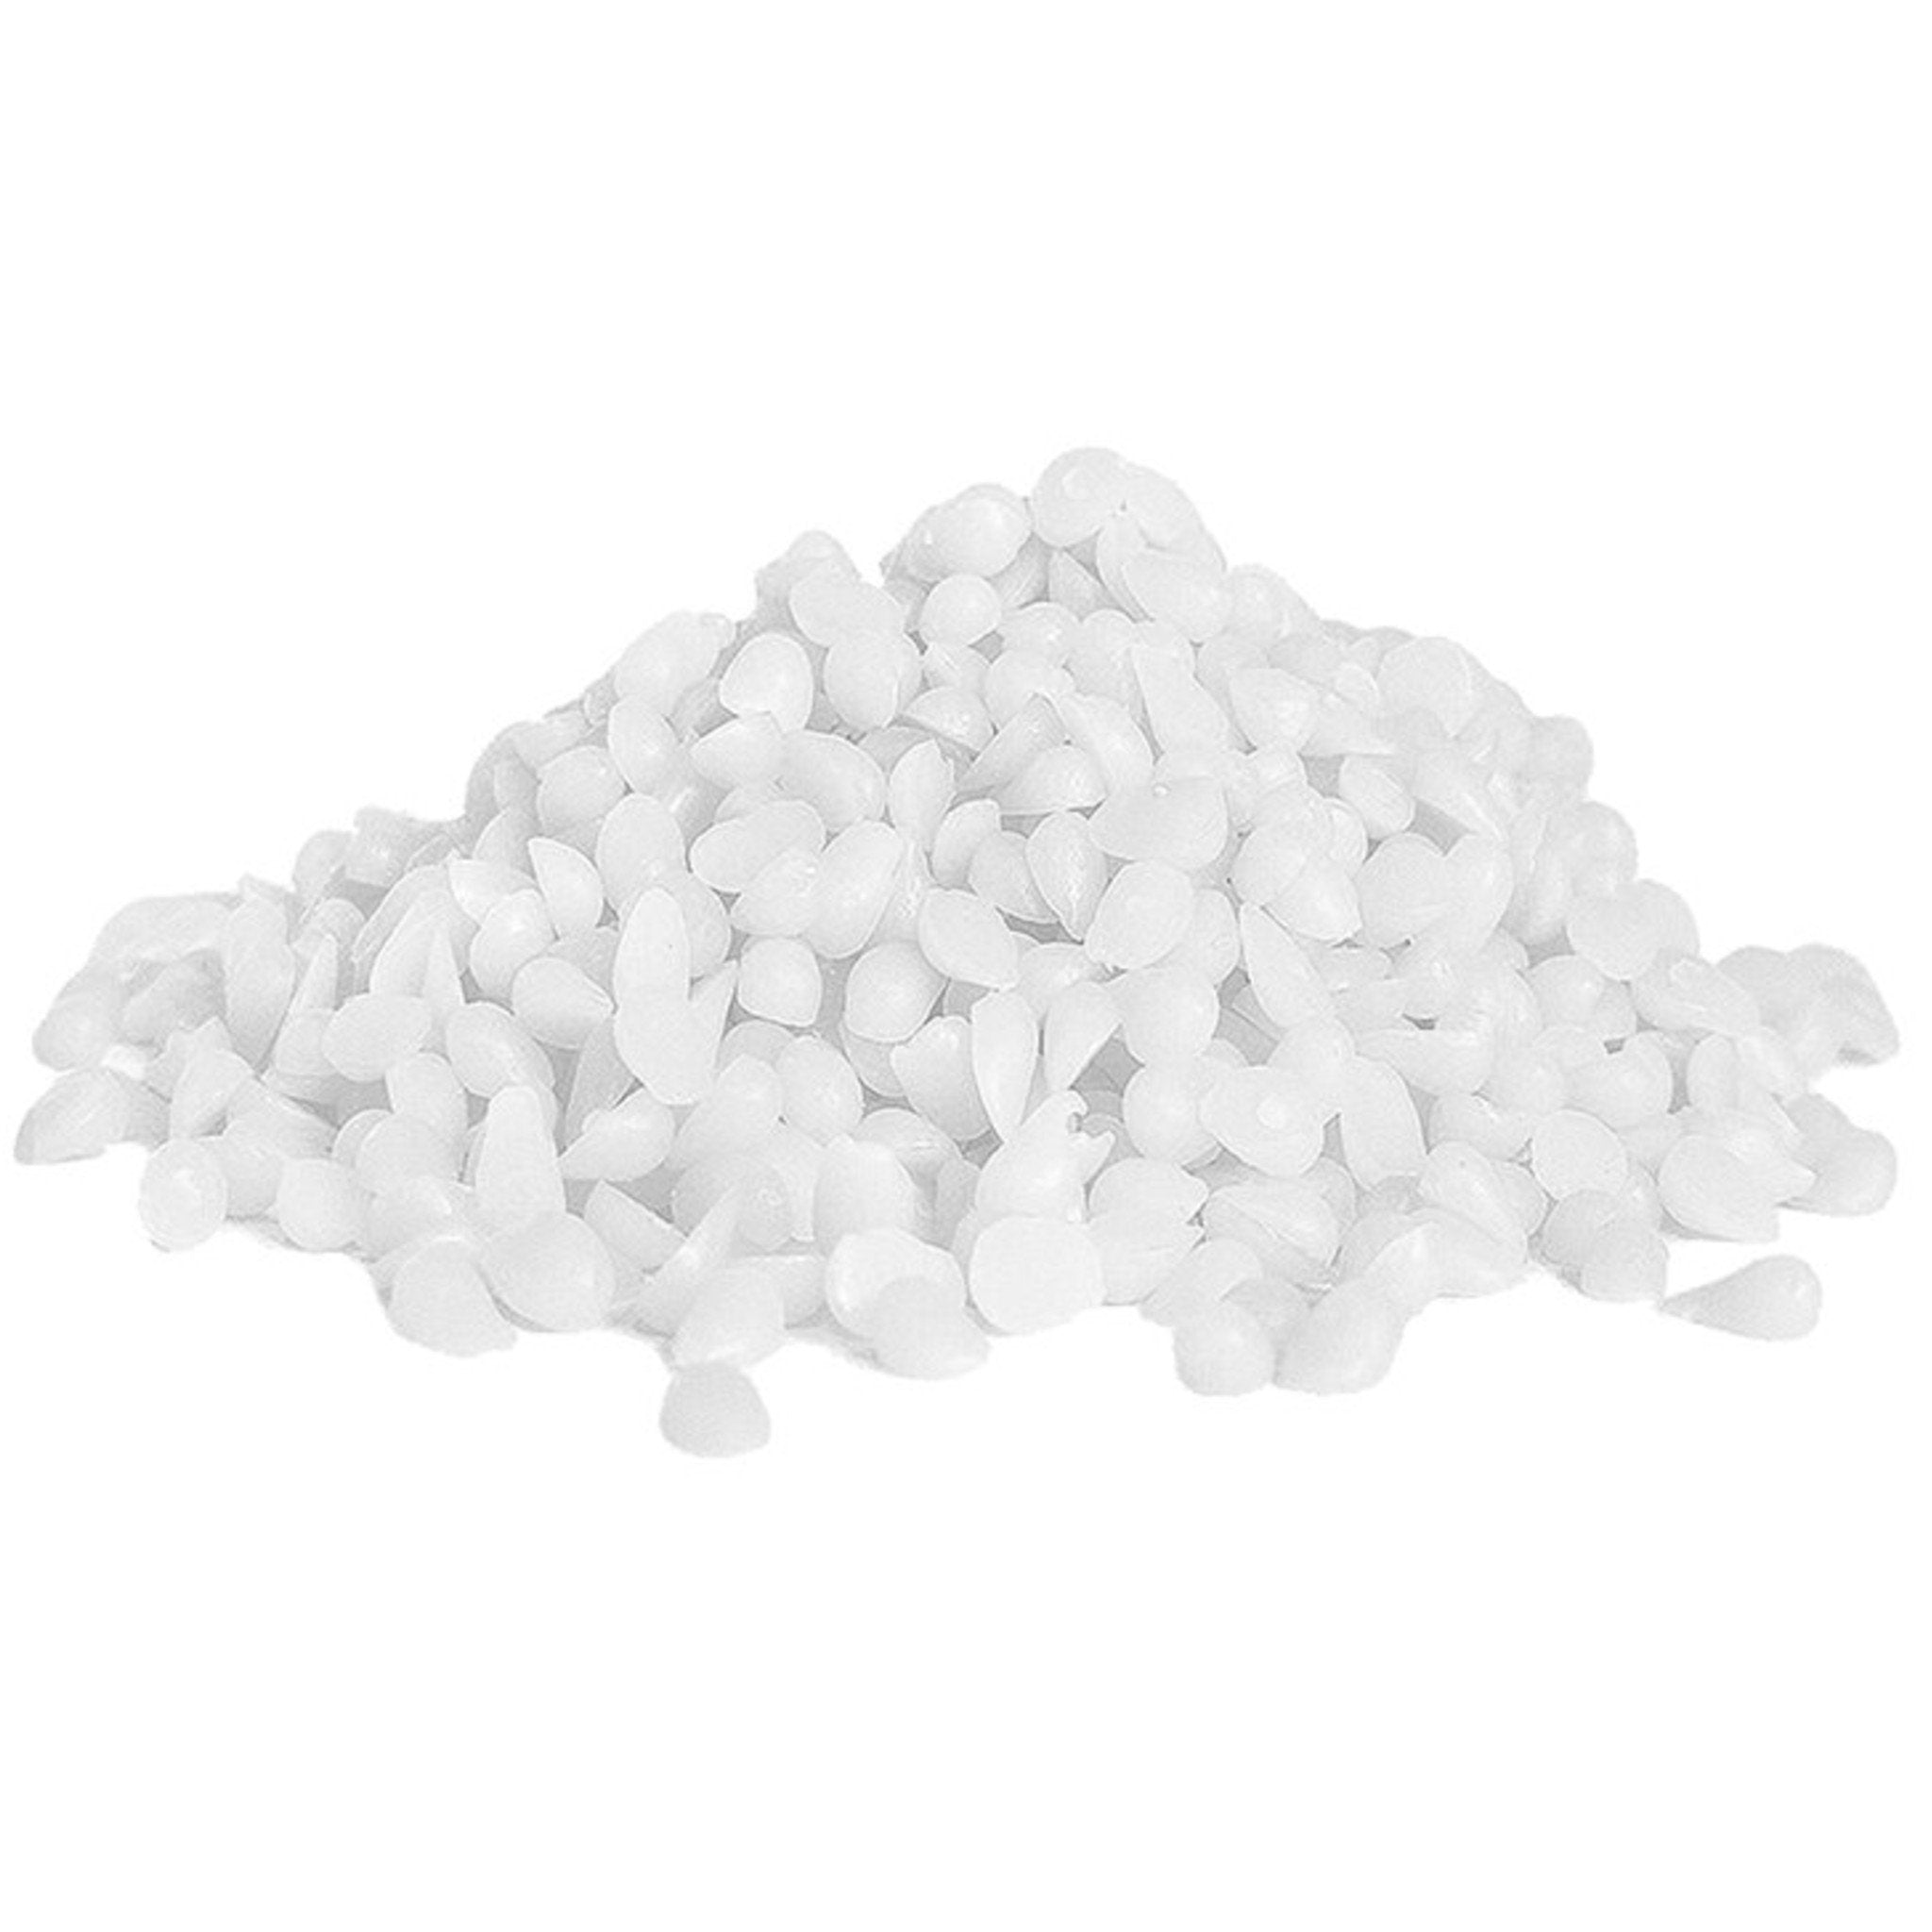 Paraffin Wax for Candle Making 2lb, Granulated Candle Wax, Wax Flakes for  Candle